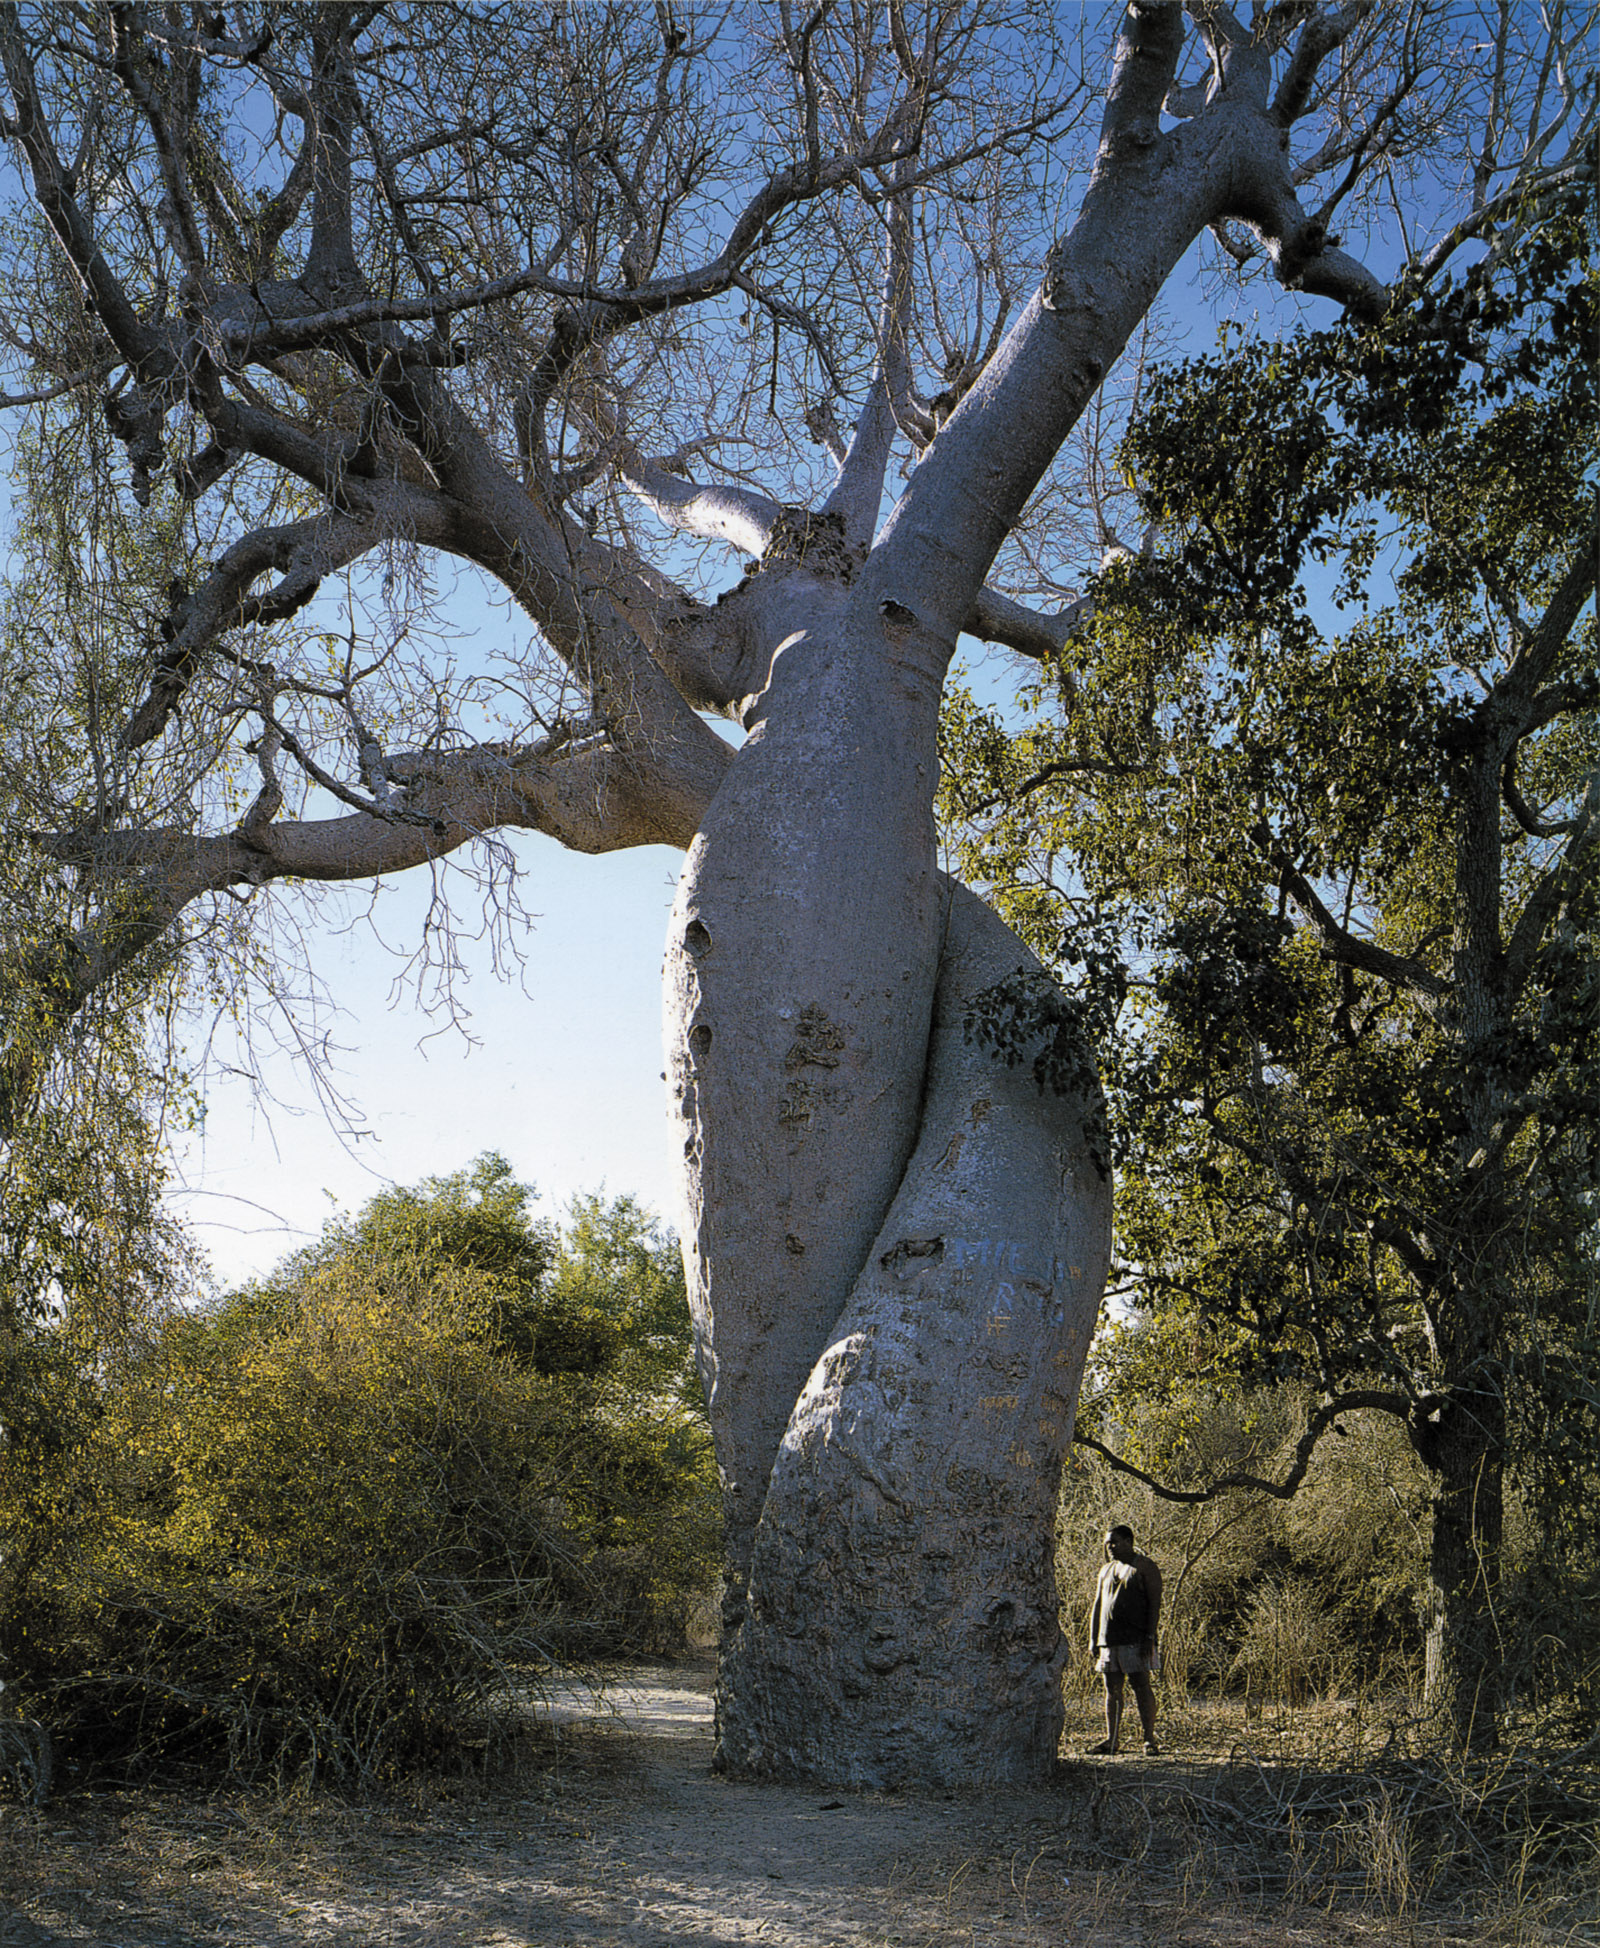 ‘The Amorous Baobabs,’ near Morondava, Madagascar; photograph by Thomas Pakenham from his book Remarkable Trees of the World (2002)